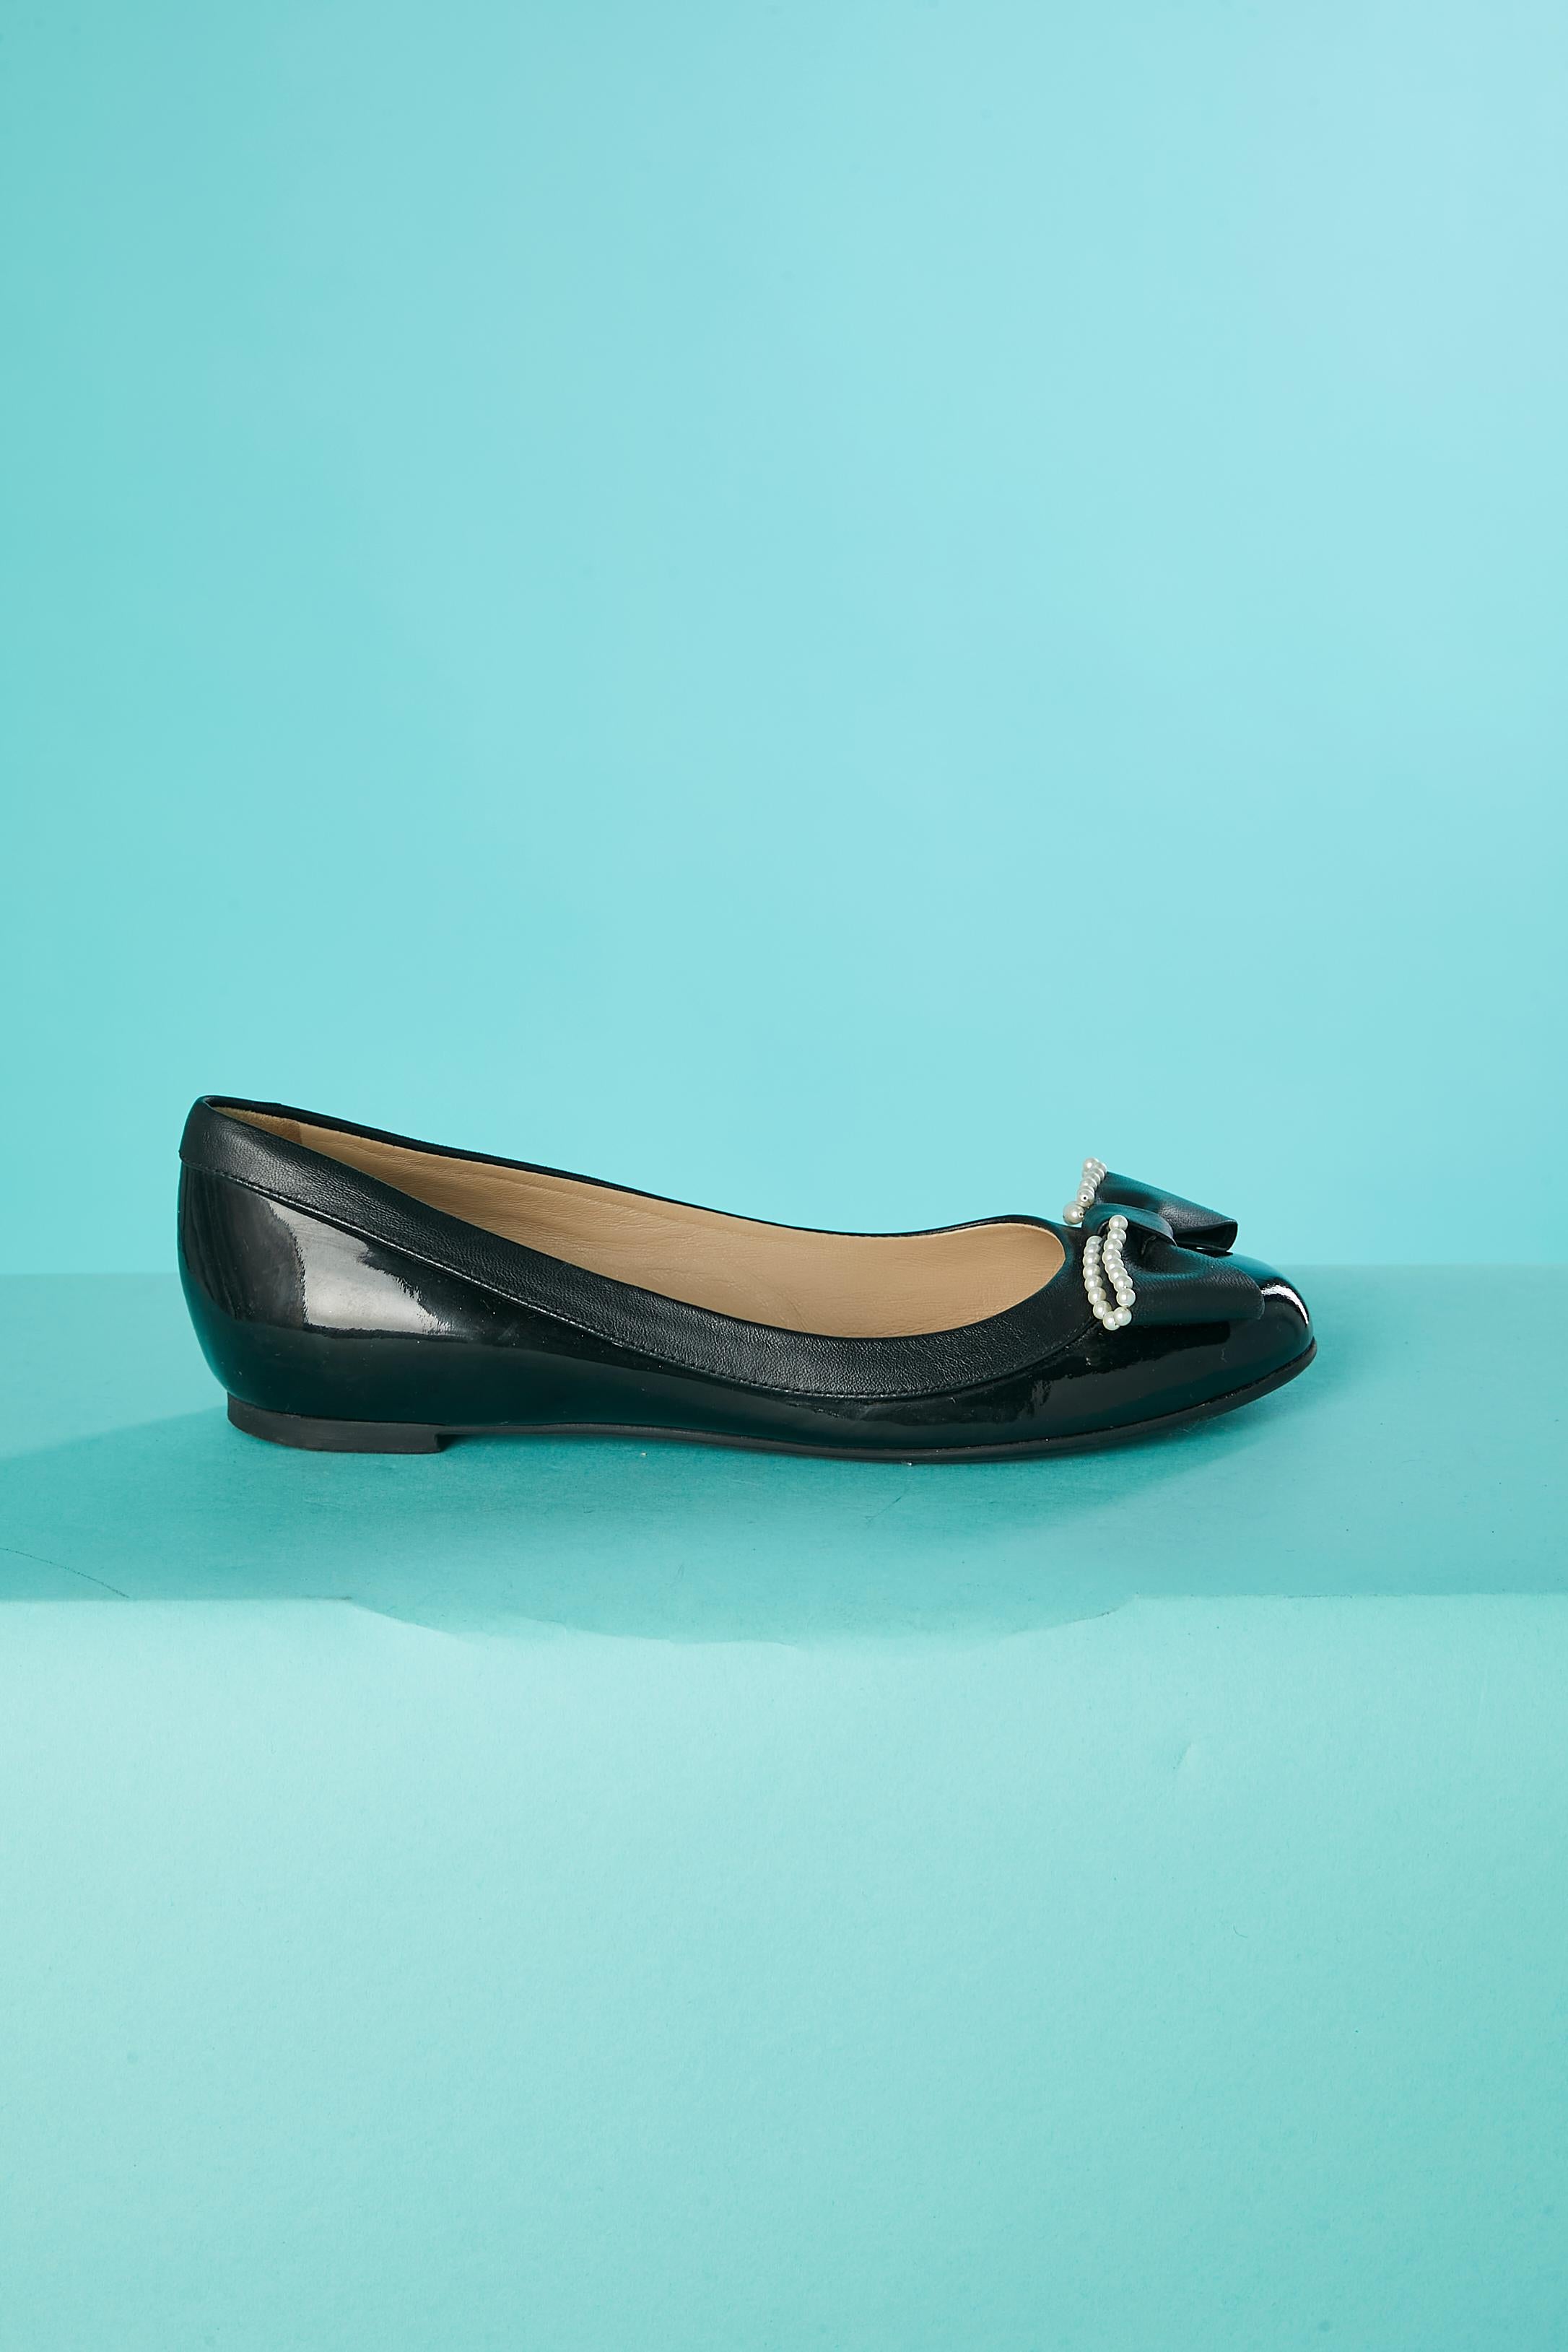 Black leather mix with black patent leather and pearls with leather bow.
SHOE SIZE : 37 (Eu) 6 (US) 